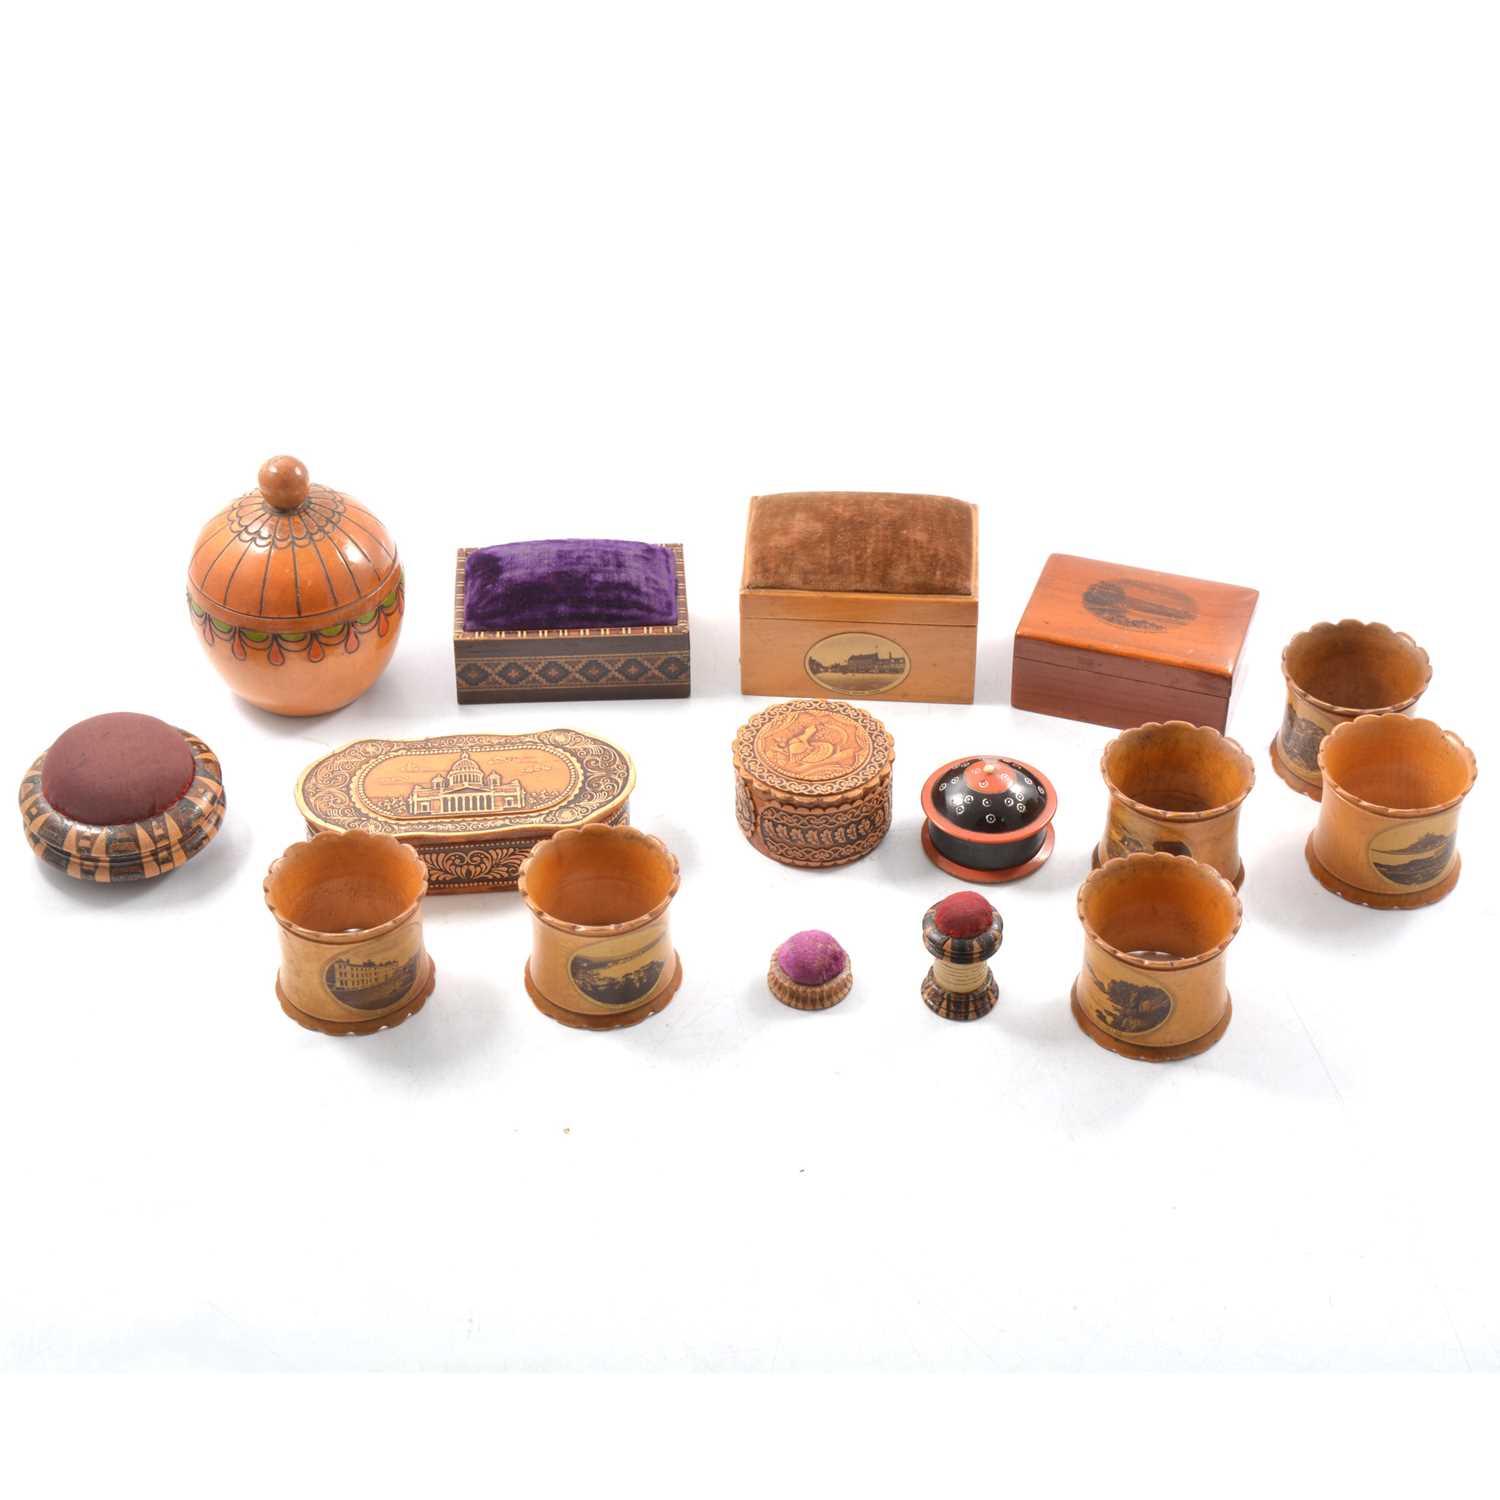 Lot 17 - Mauchline ware boxes, napkin rings, marquetry pin cushions, and other wooden items.